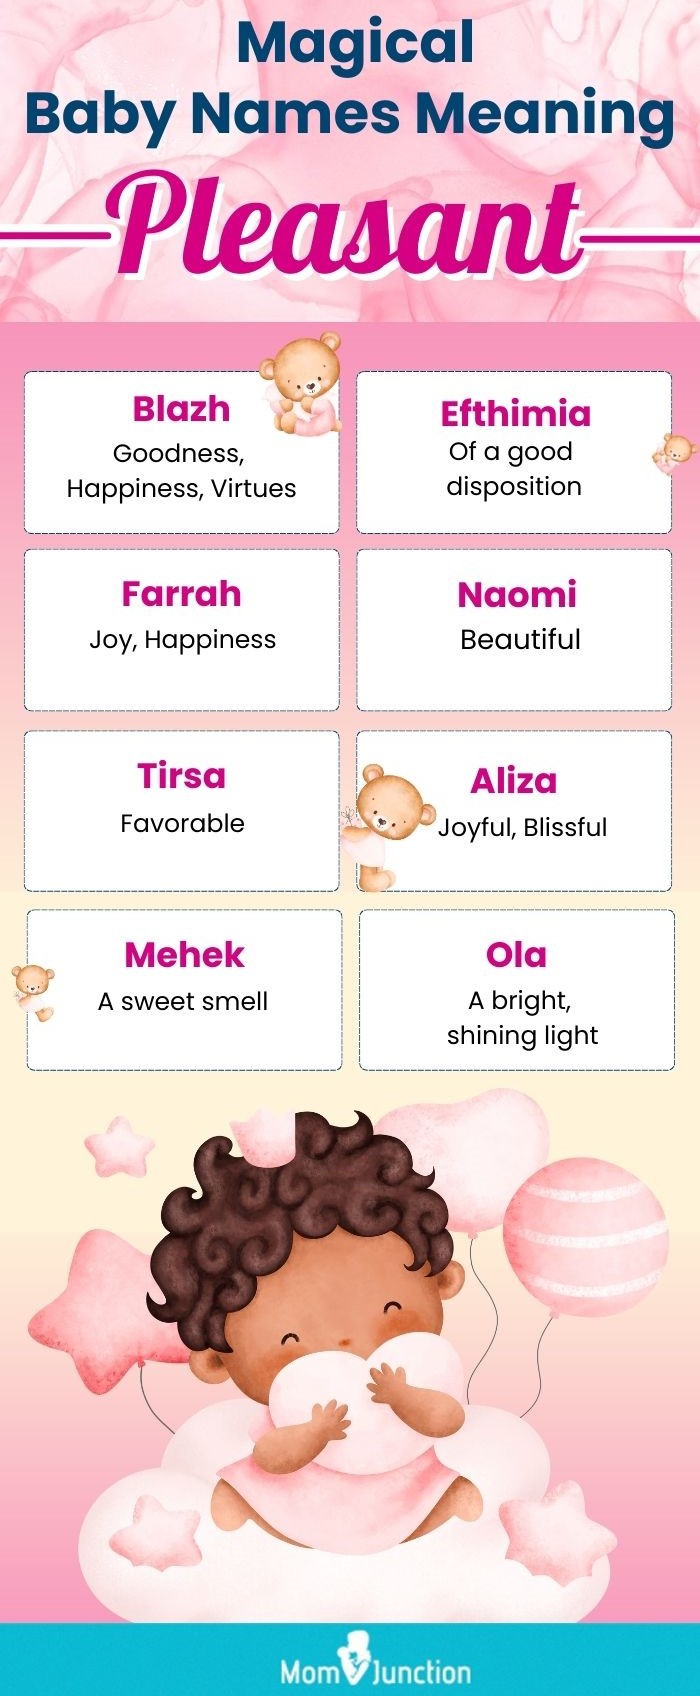 magical baby names meaning pleasant (infographic)